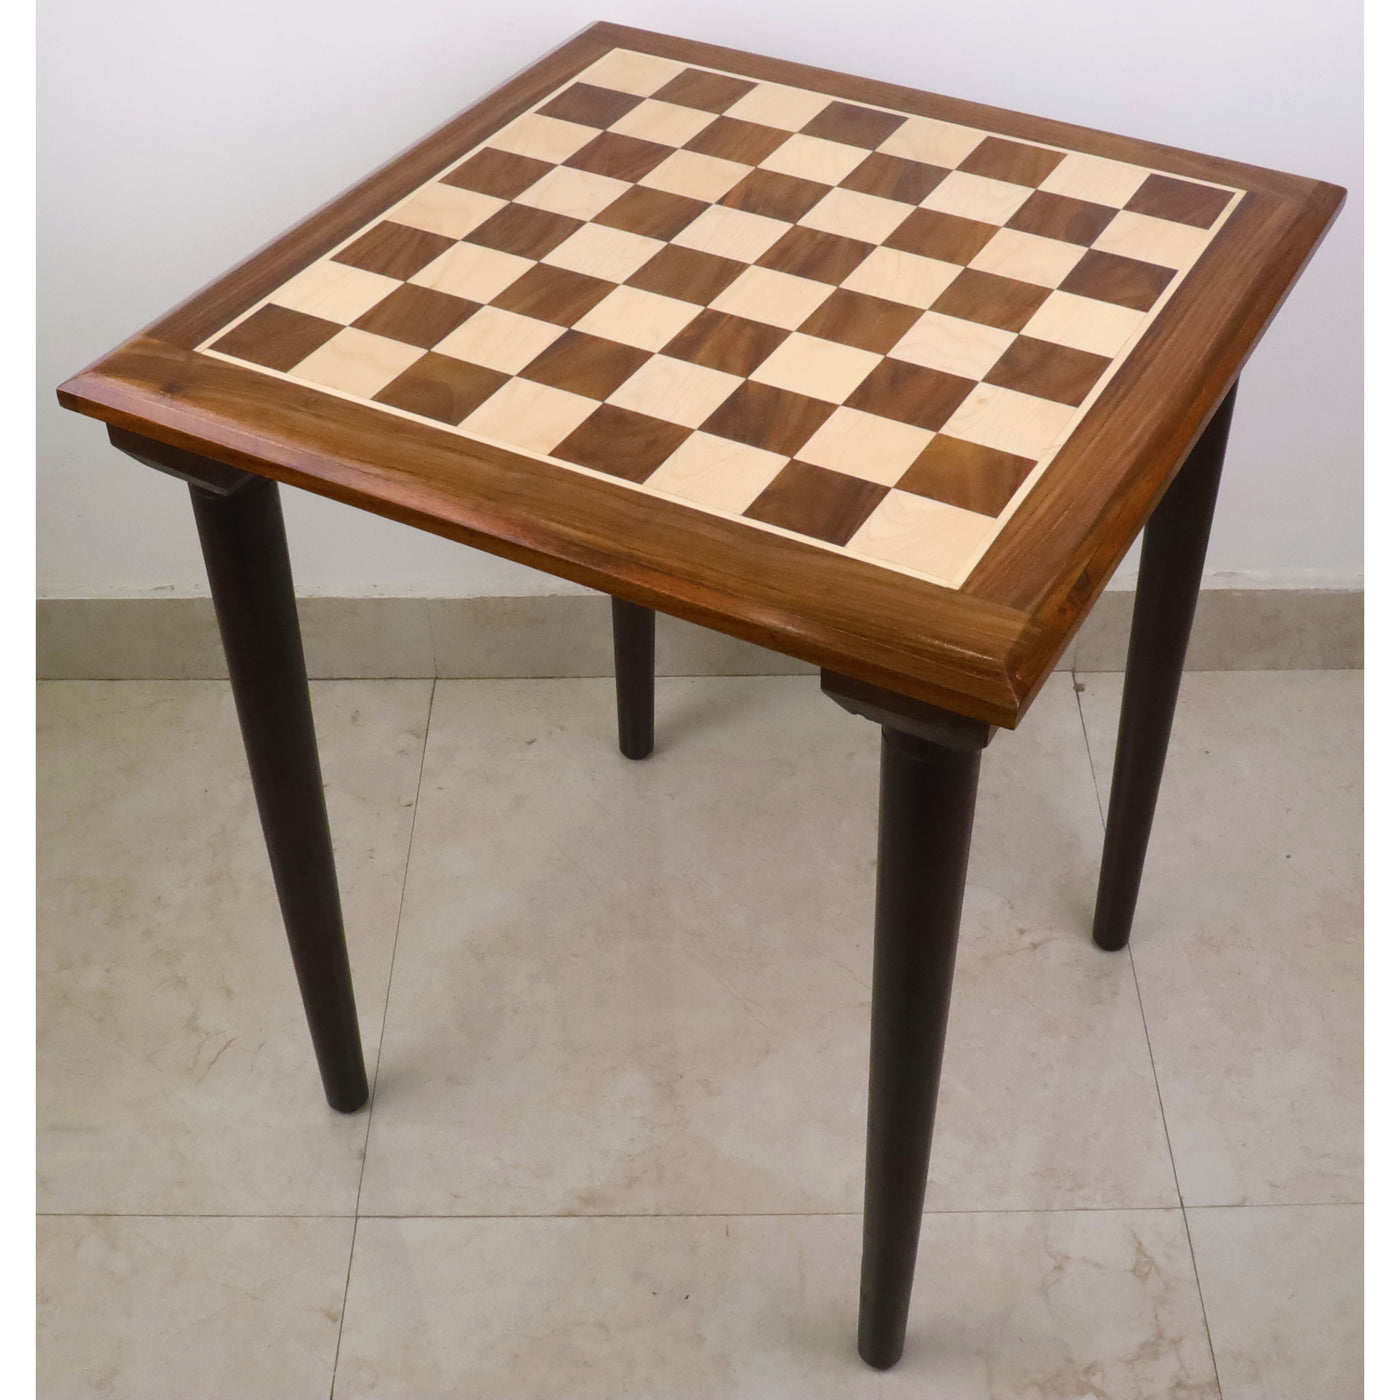 22" Tournament Chess Board Table with Stoppers - 26" Height - Golden Rosewood